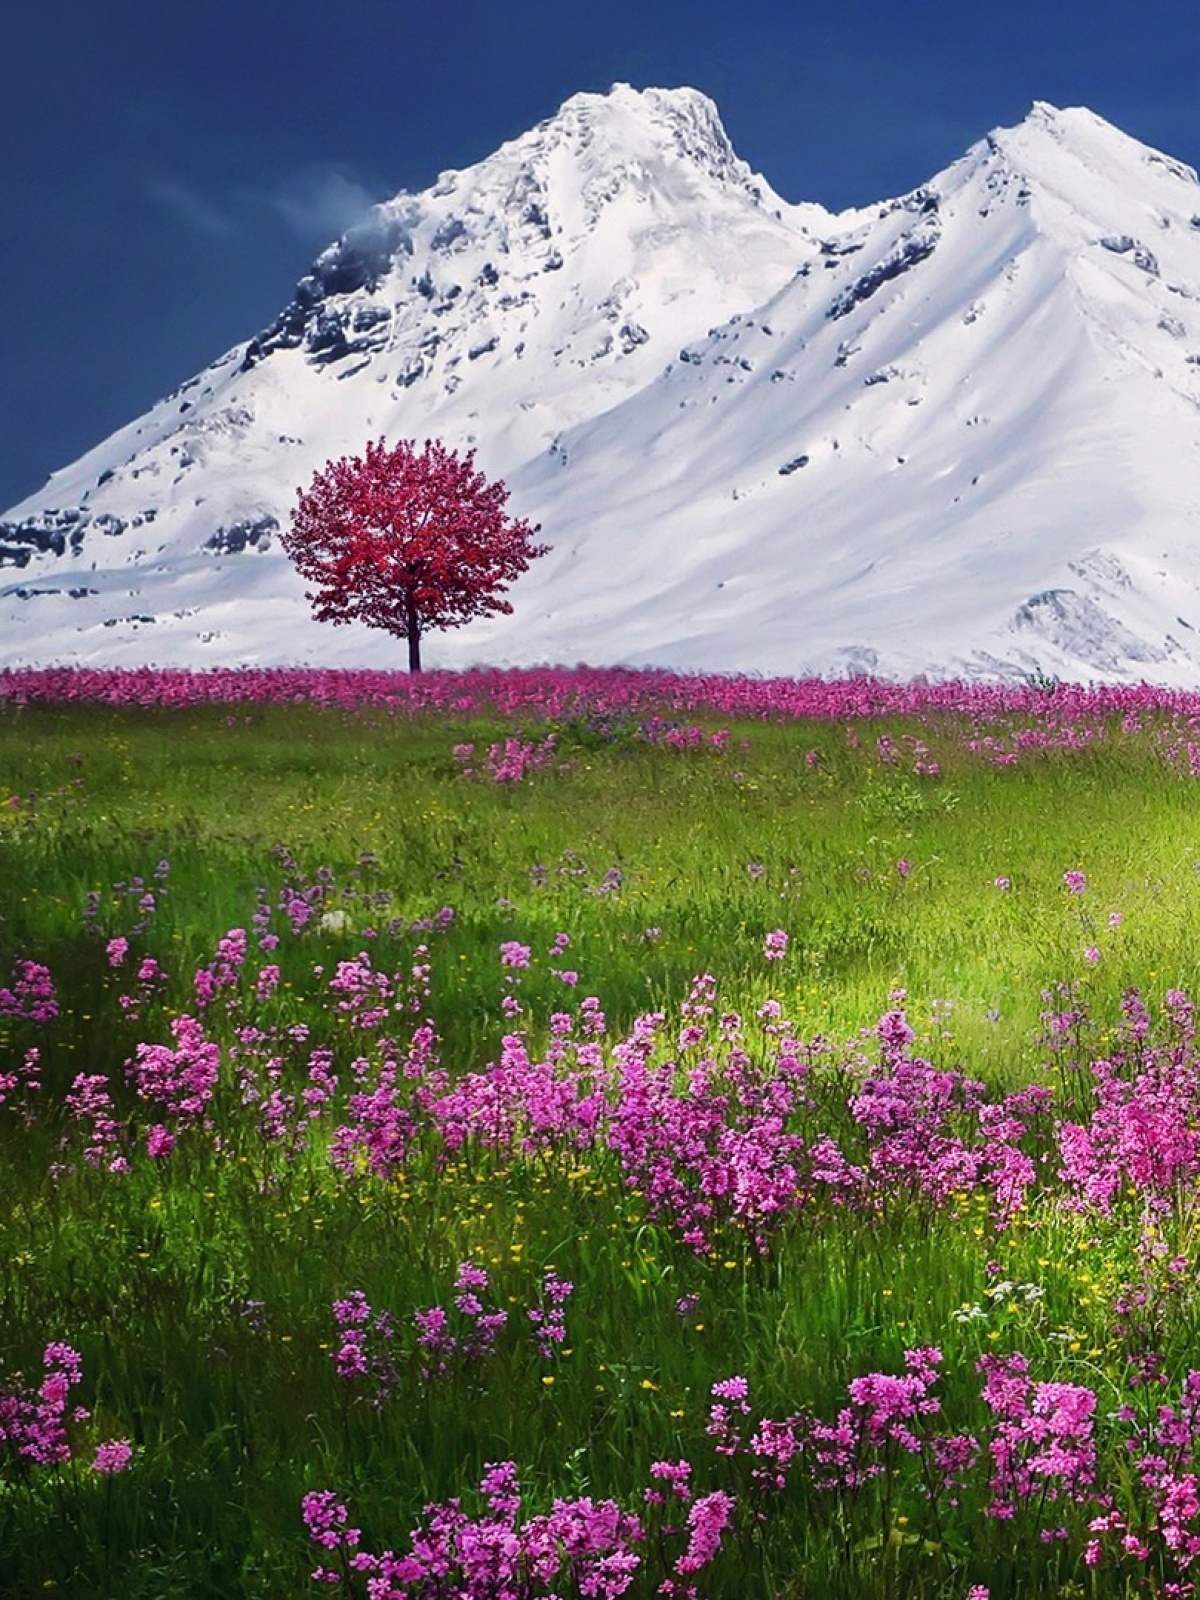 Nature Mobiles Wall - Spring In Switzerland 2019 - HD Wallpaper 